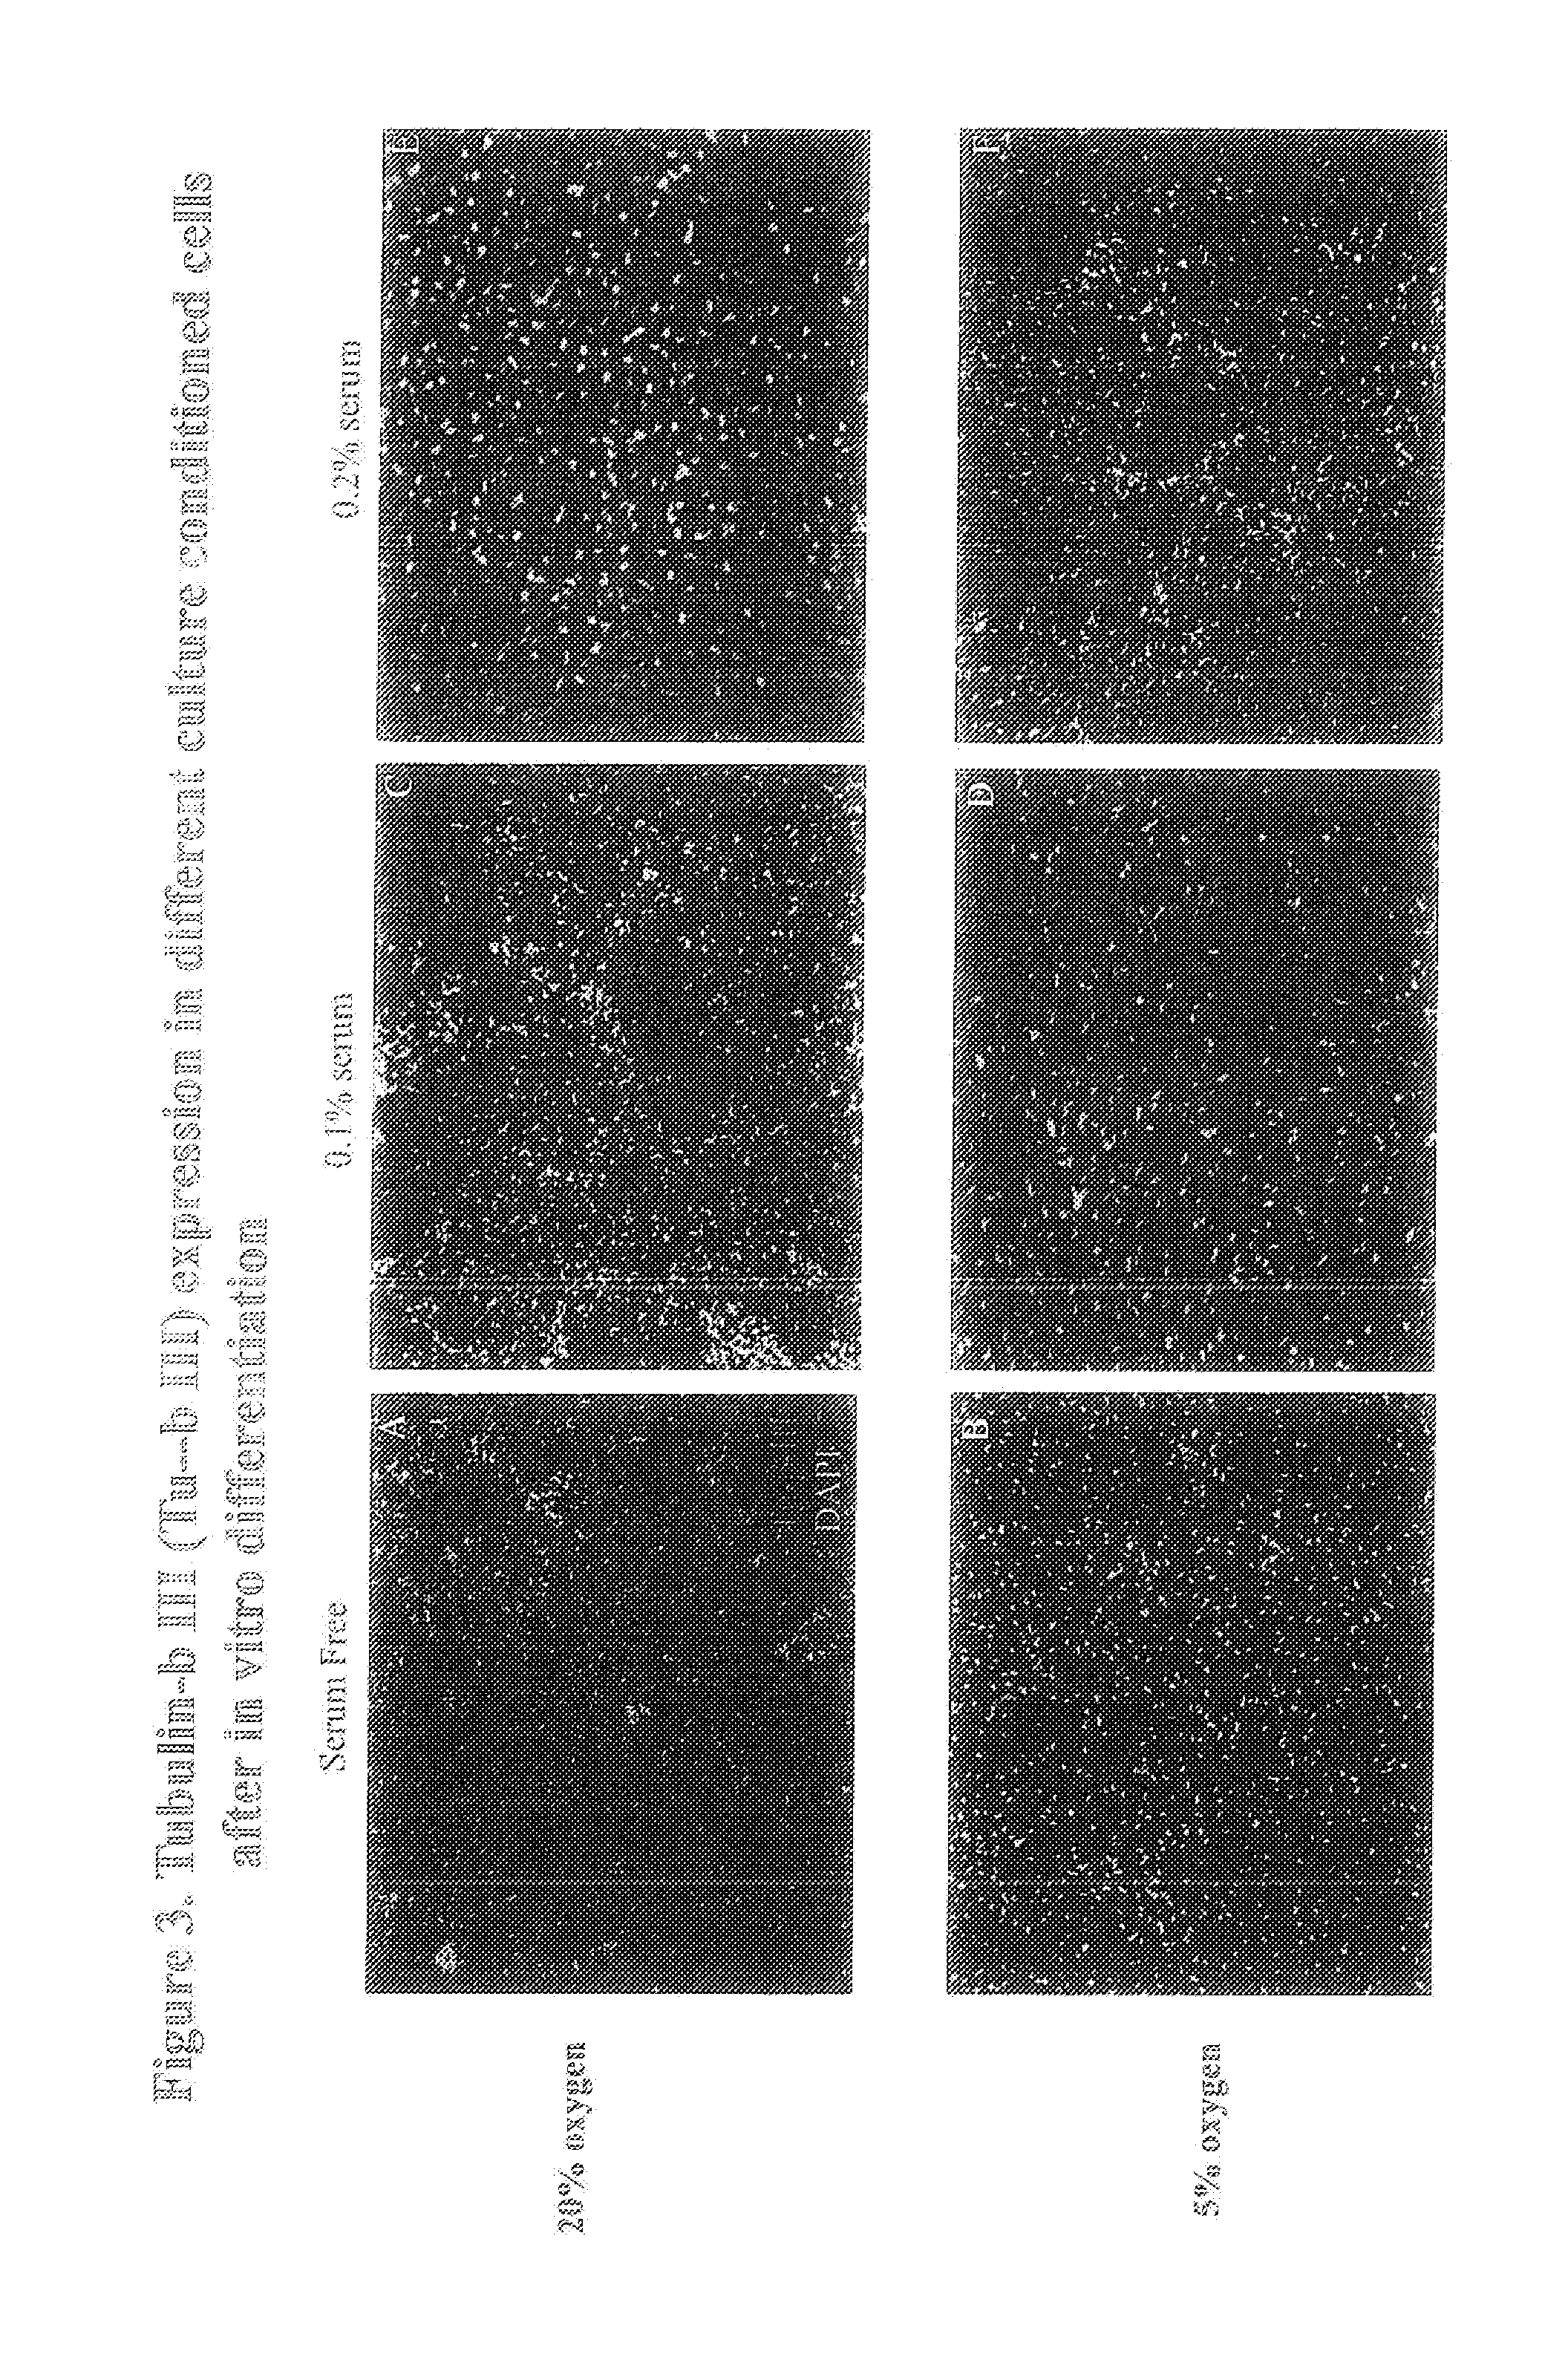 Compositions of stem cells and stem cell factors and methods for their use and manufacture